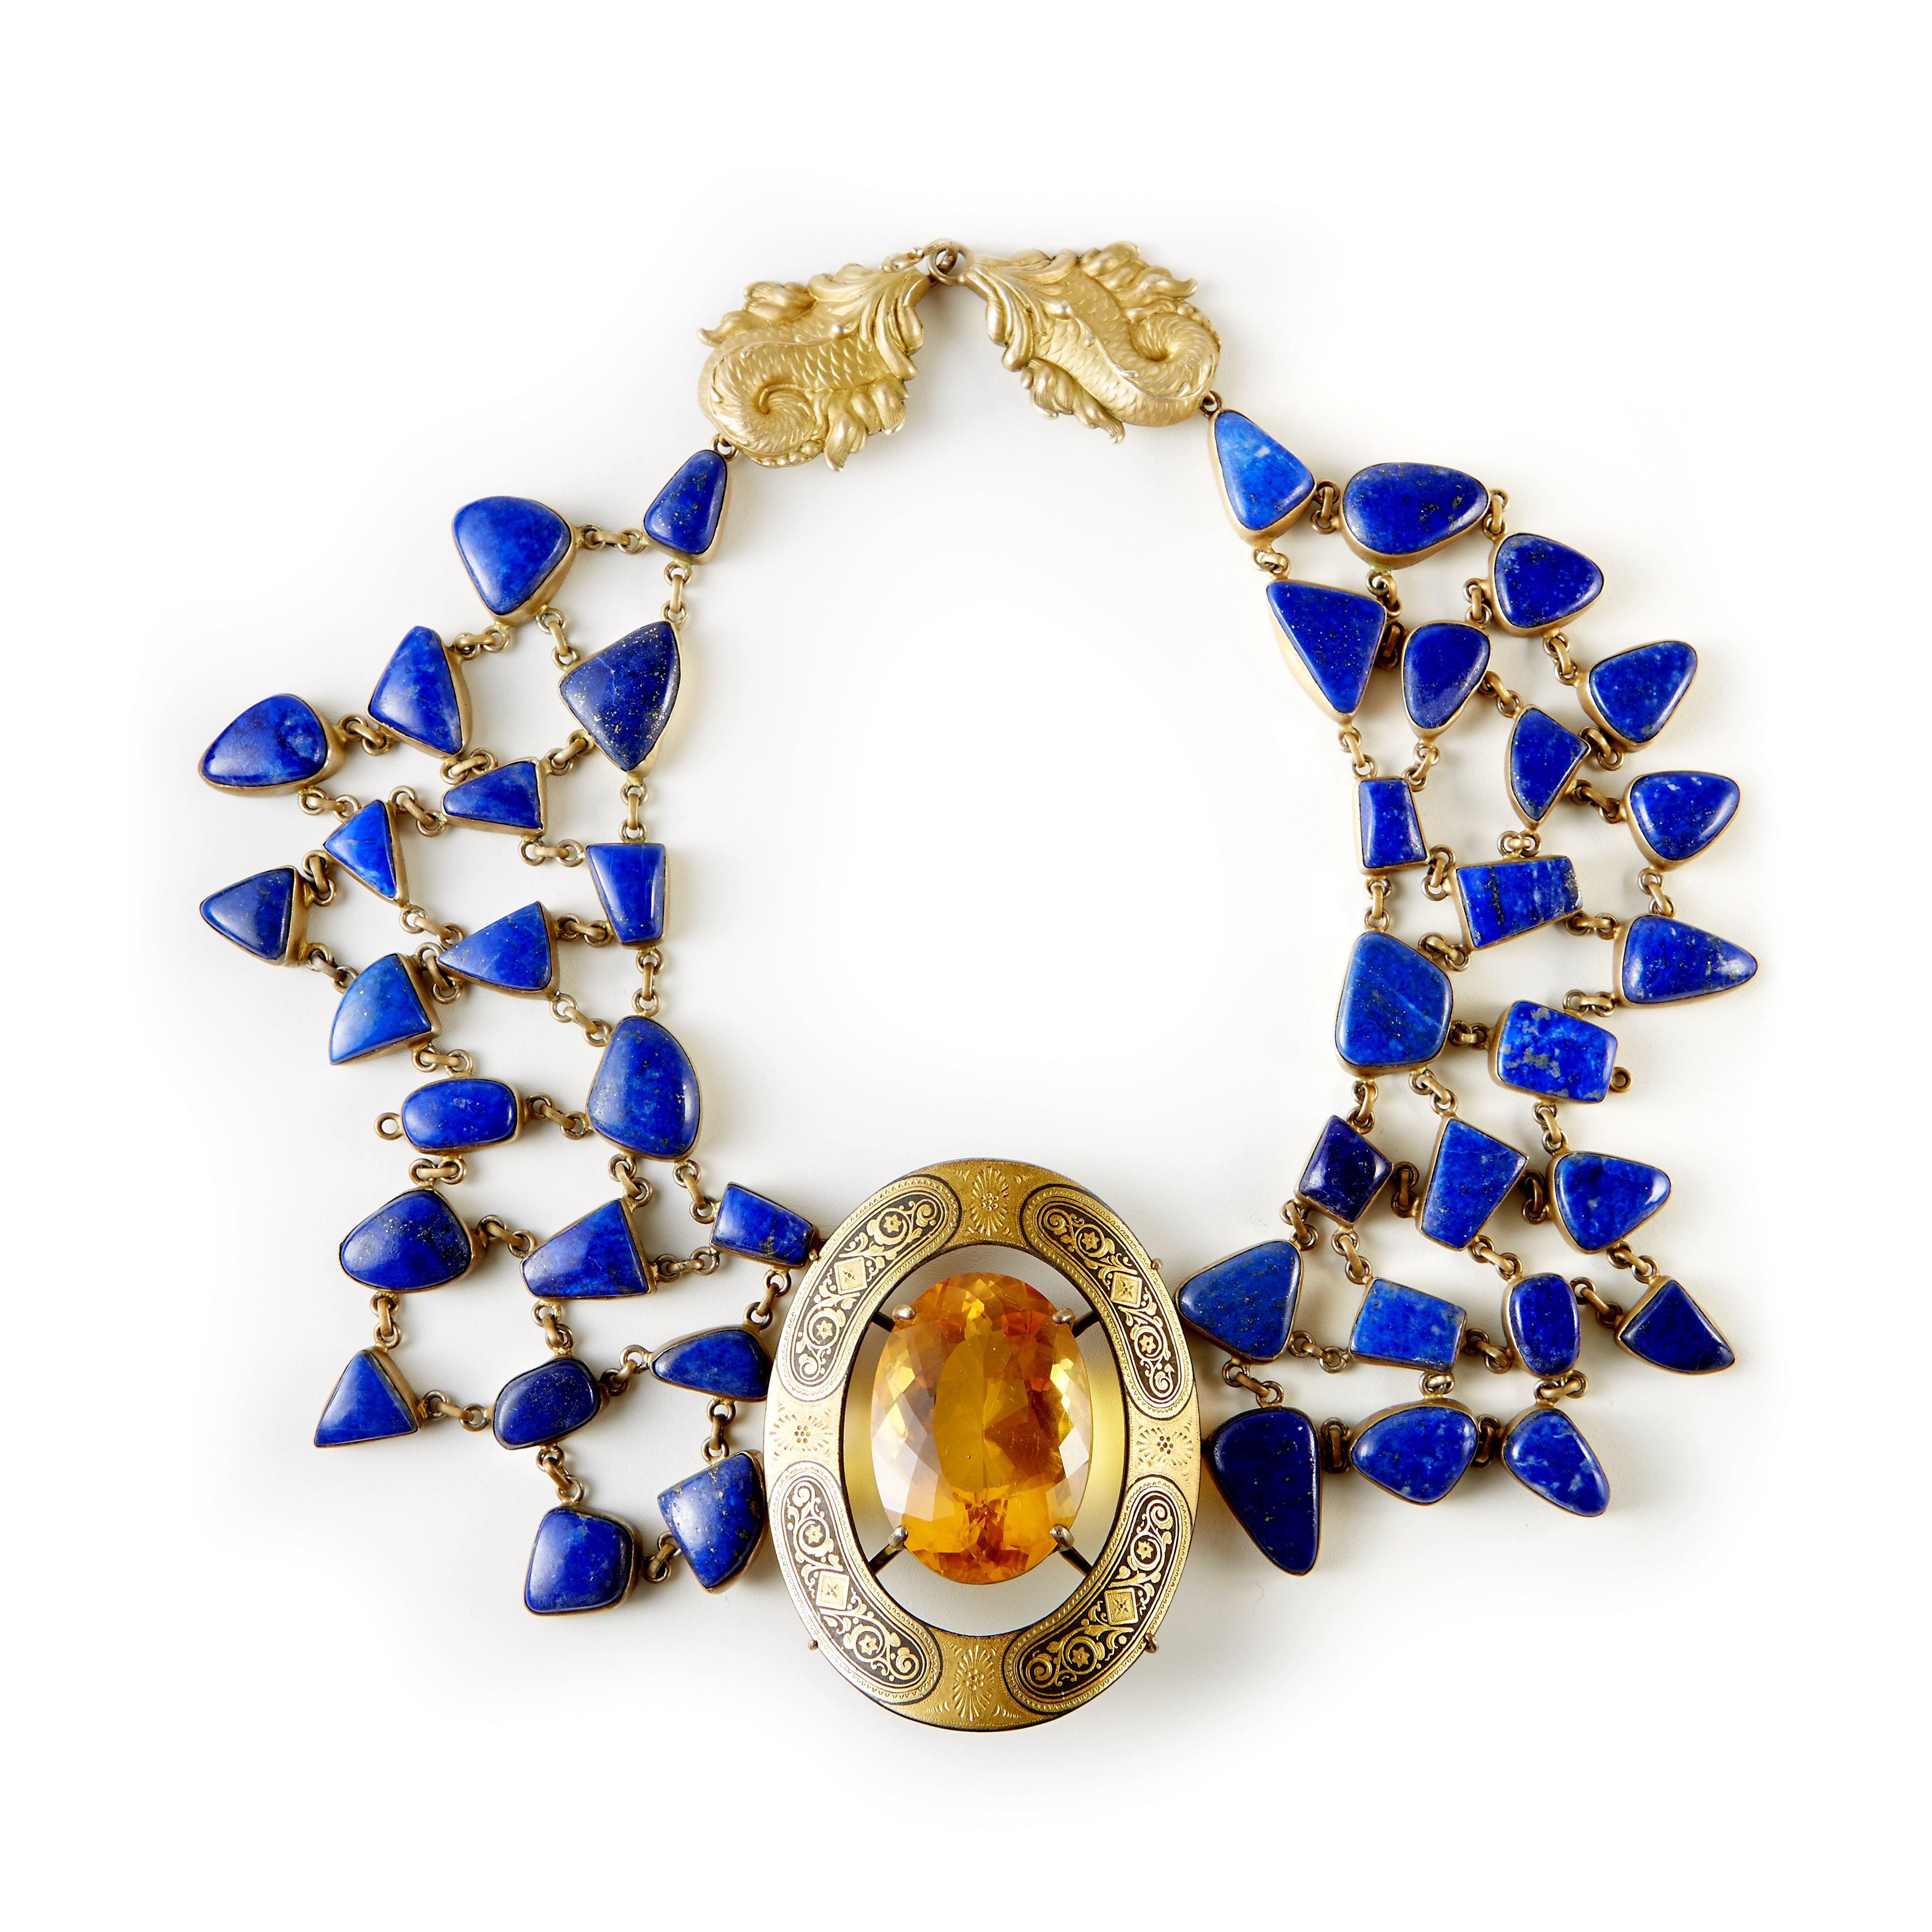 Erin Mac wonderfully colorful Lapis in silver Gilt,  an Antique Spanish buckle with one over 100ct Golden Citrine set in gold, unique clasp